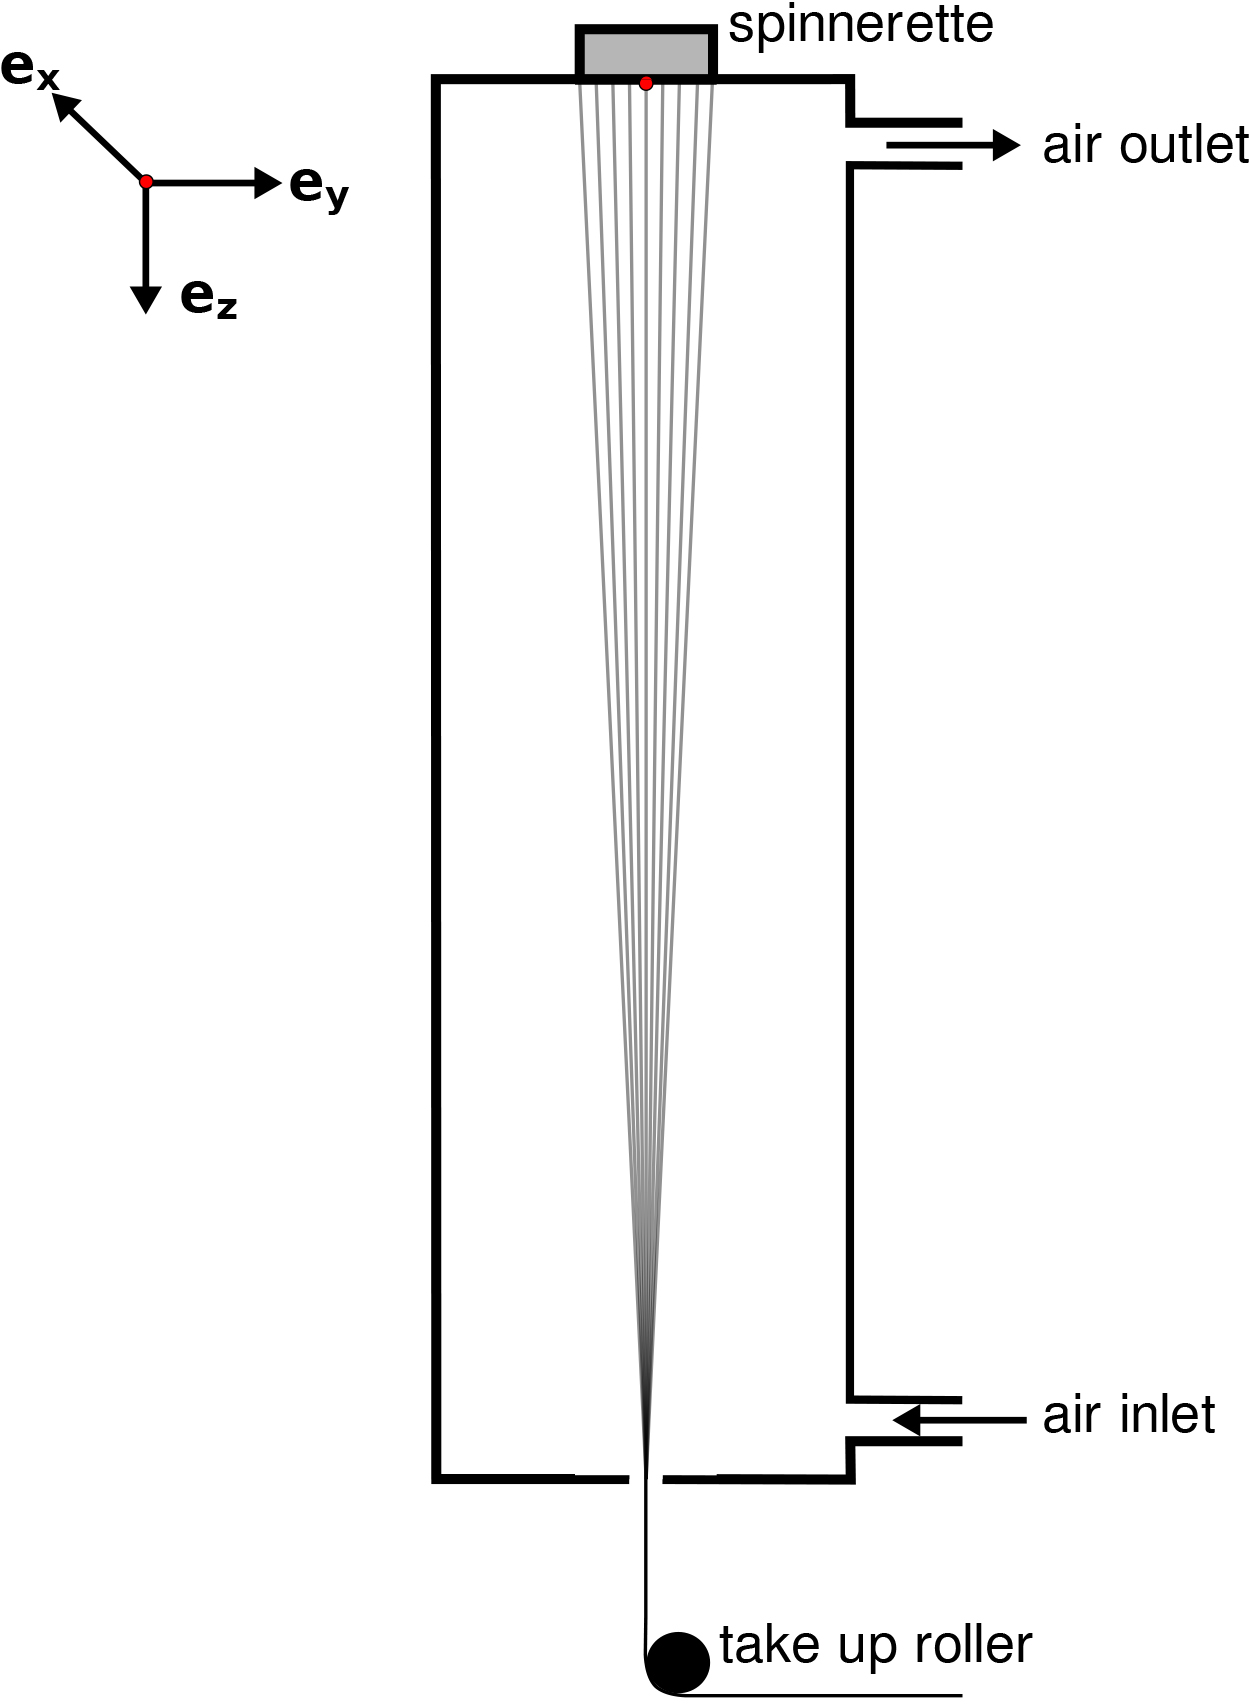 Schematic model of a dry spinning plant